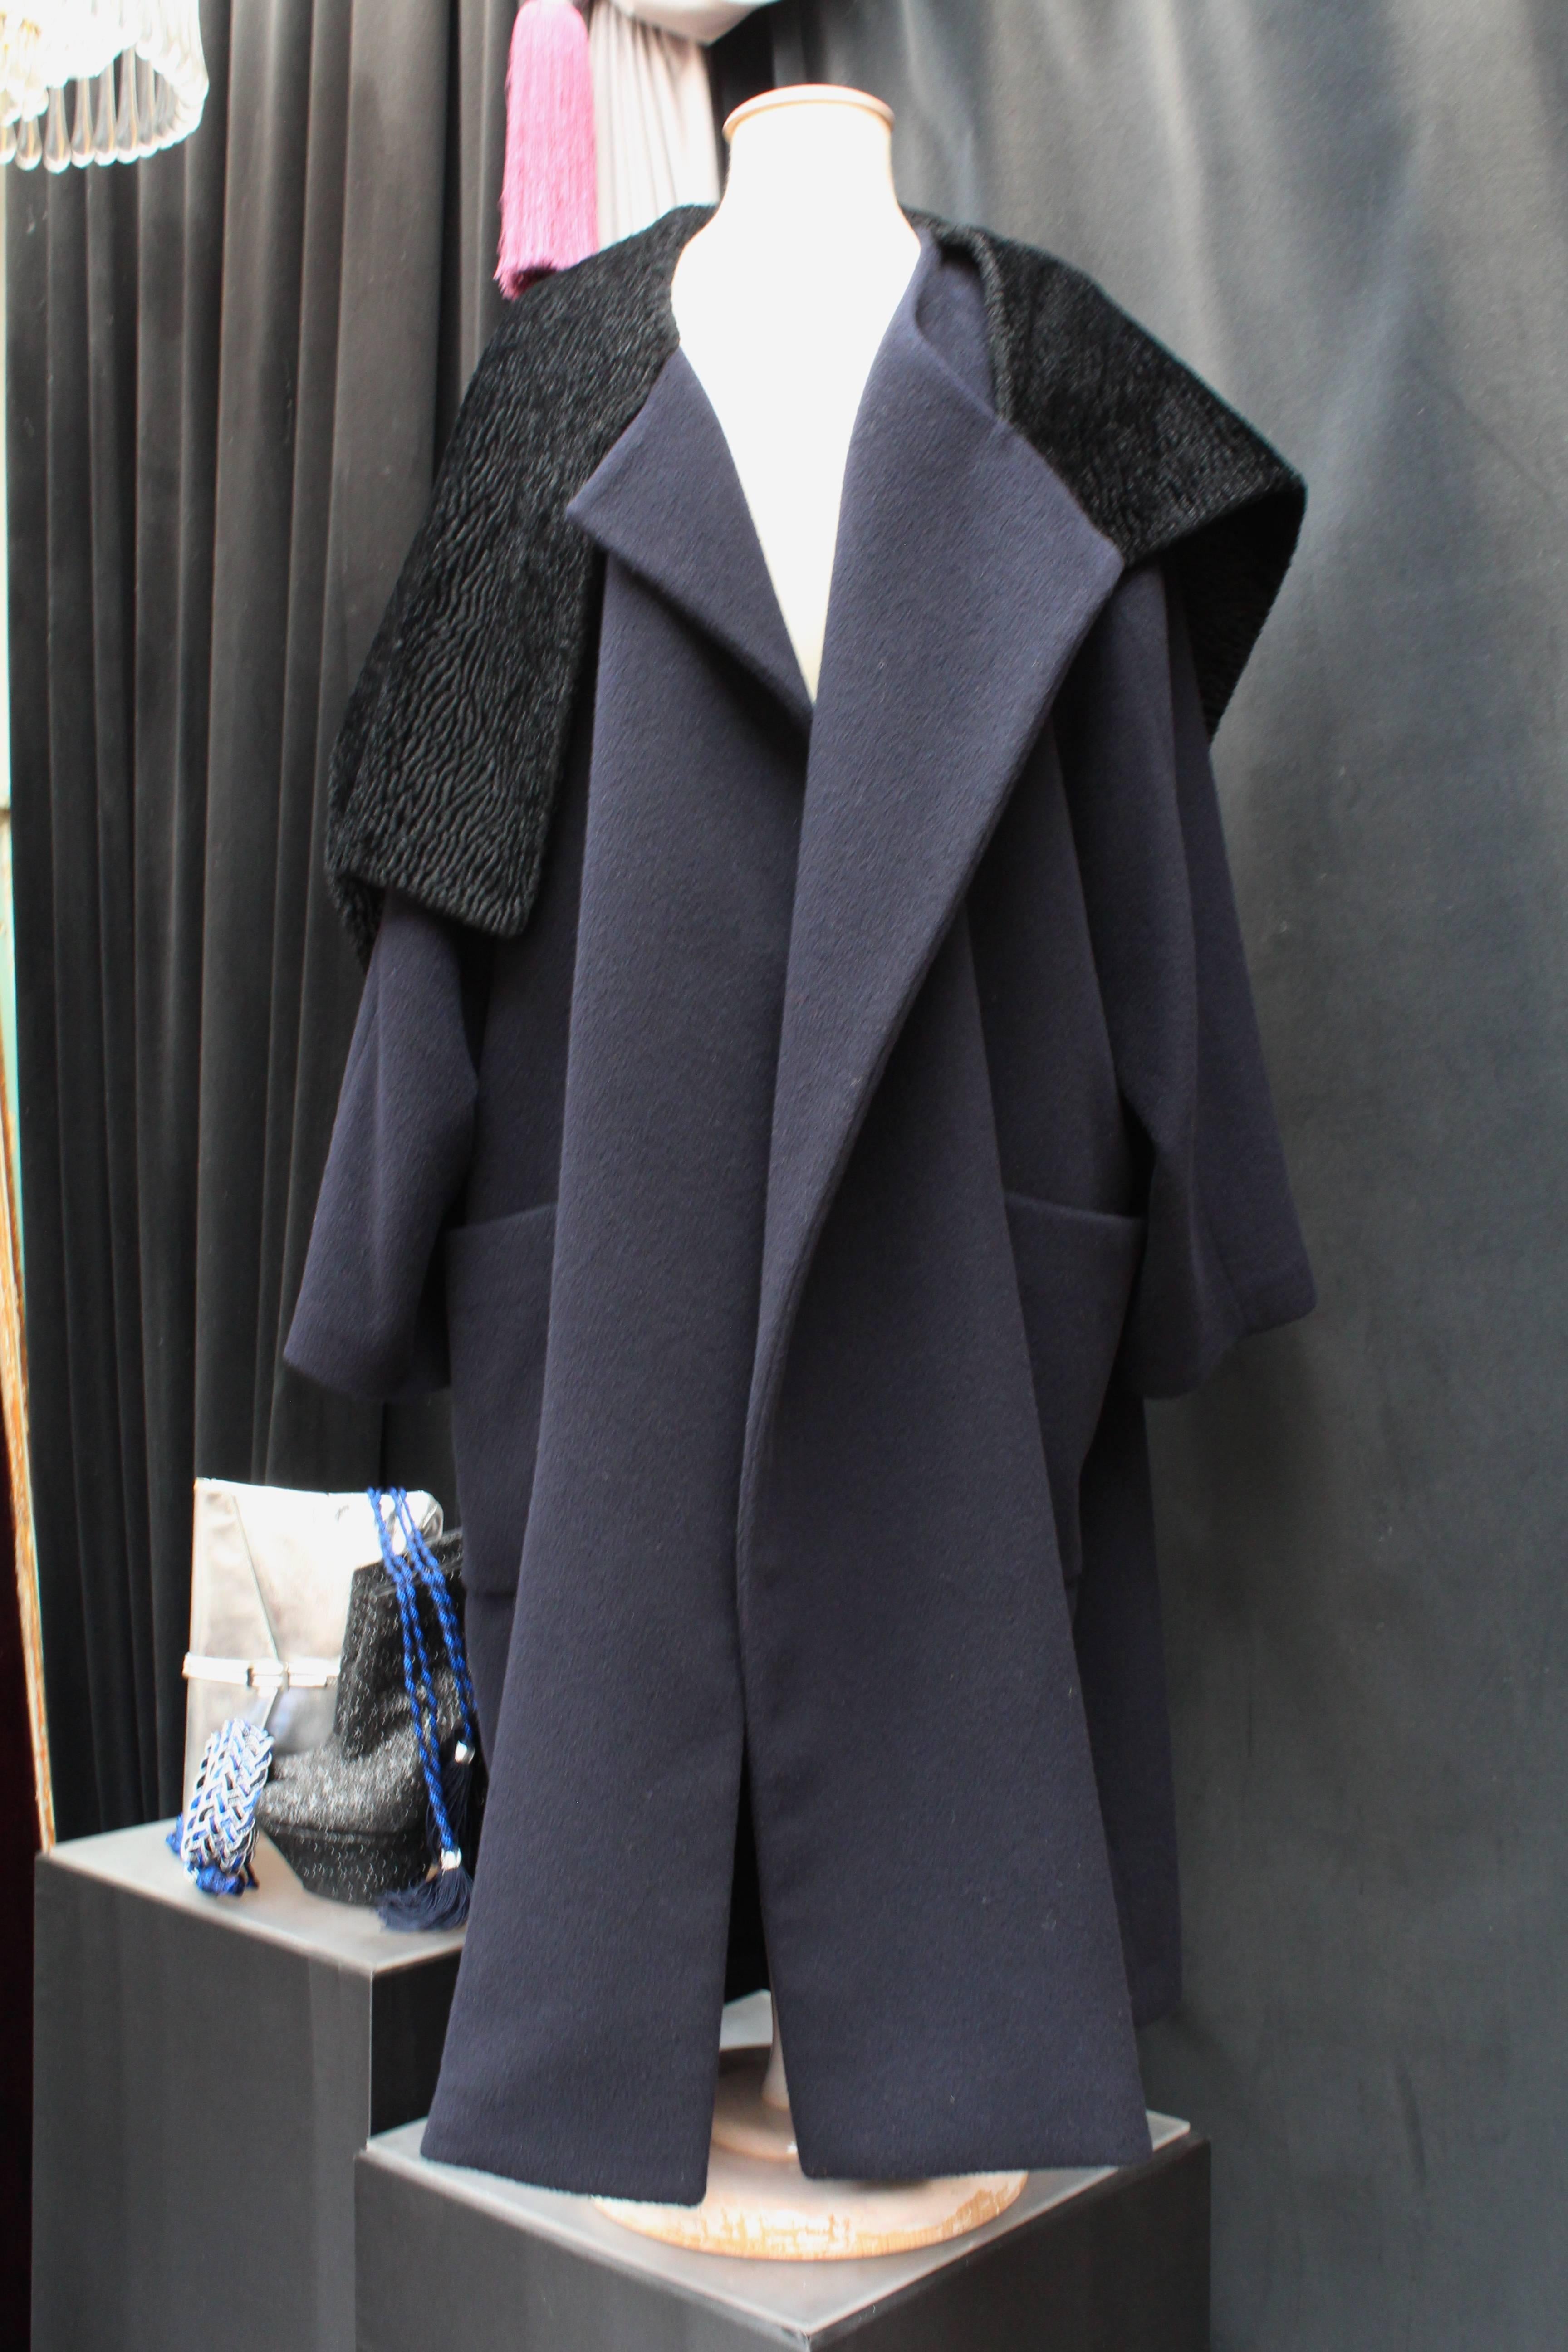 COMME DES GARCONS Oversized coat comprised of navy blue wool and a black chenille wool large collar in the style of astrakan.

The straight coat features two pocket in the front and a black satin lining. 

There are no buttonhole on the coat,